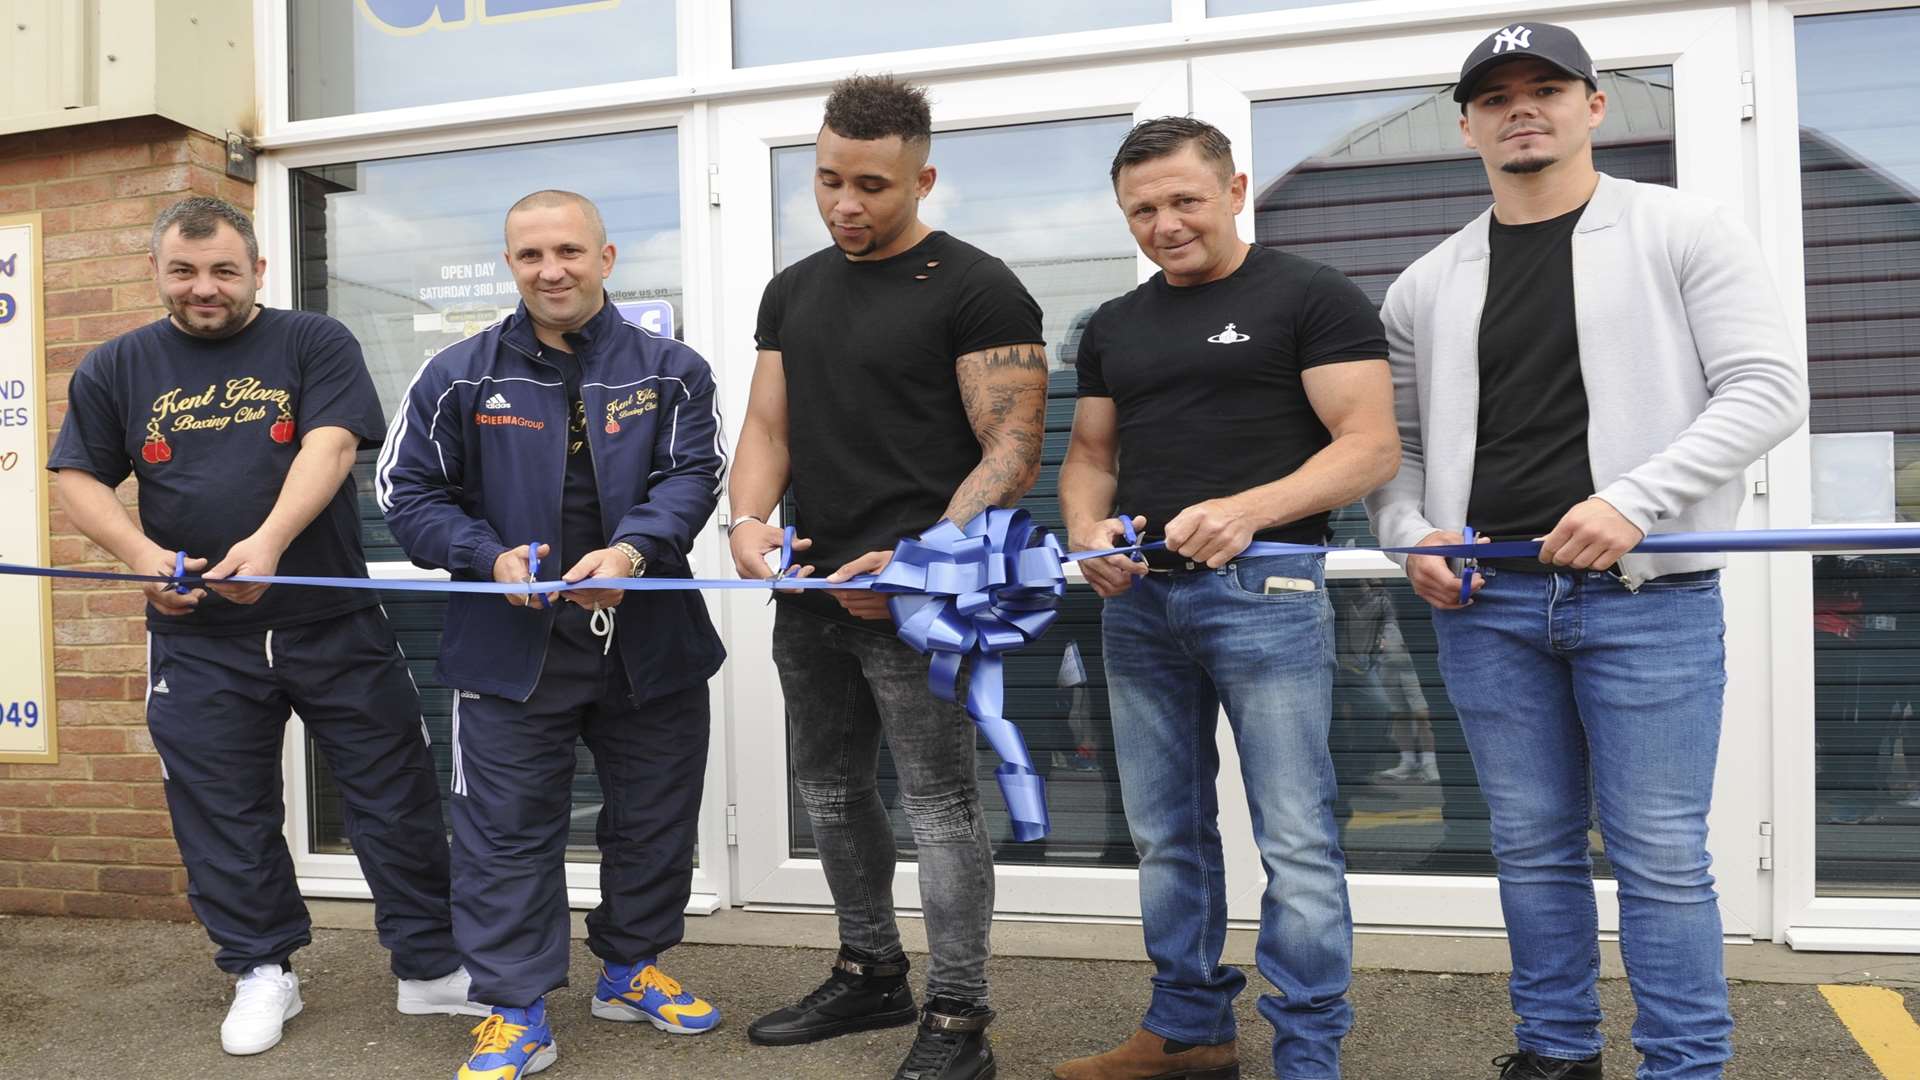 Cutting the ribbon to open the new gym are, from left, David Shepard, Charlie Rumbol, Grant Dennis, Johnny Armour and Johnny Coyle Picture: Steve Crispe